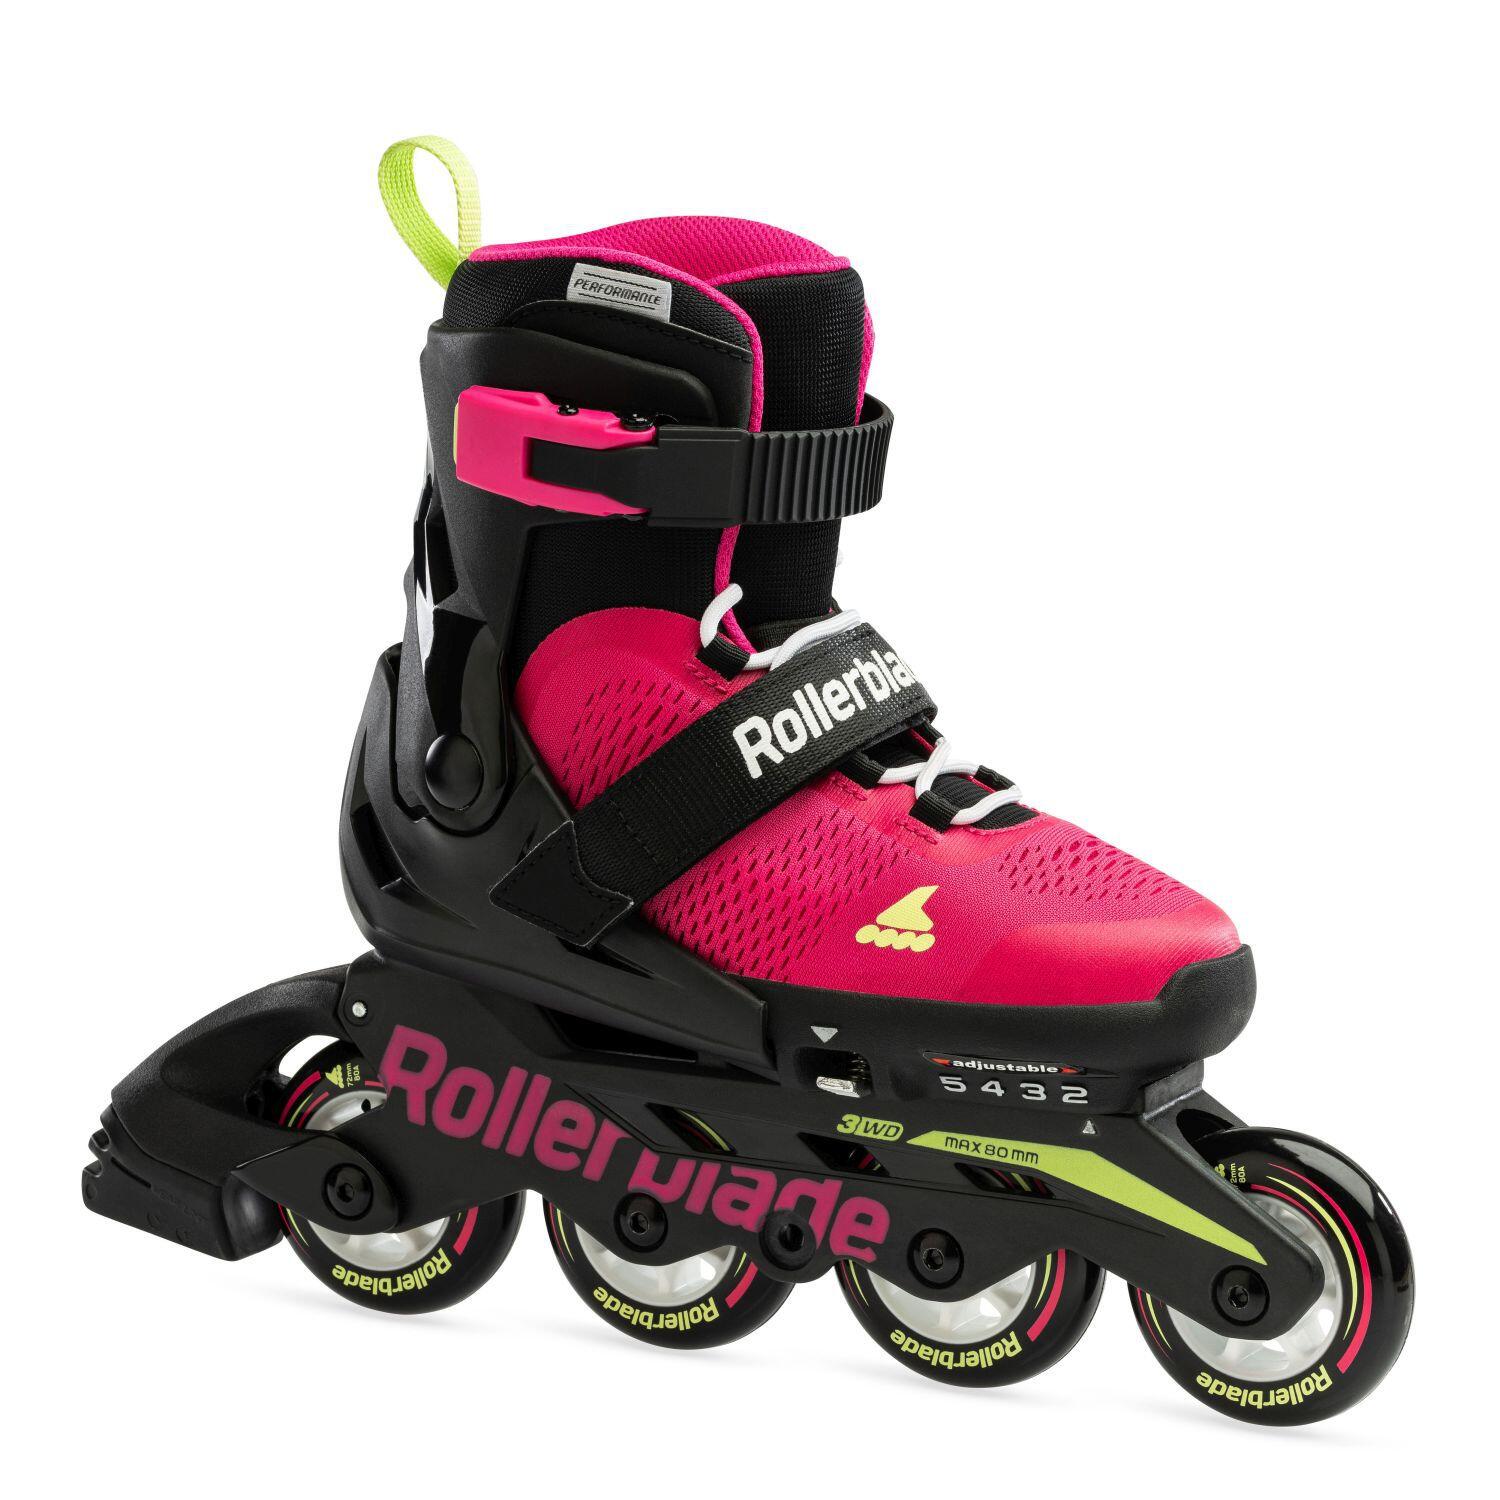 2022 Microblade G Kids Fitness Inline Skate - Pink/Green 1/6